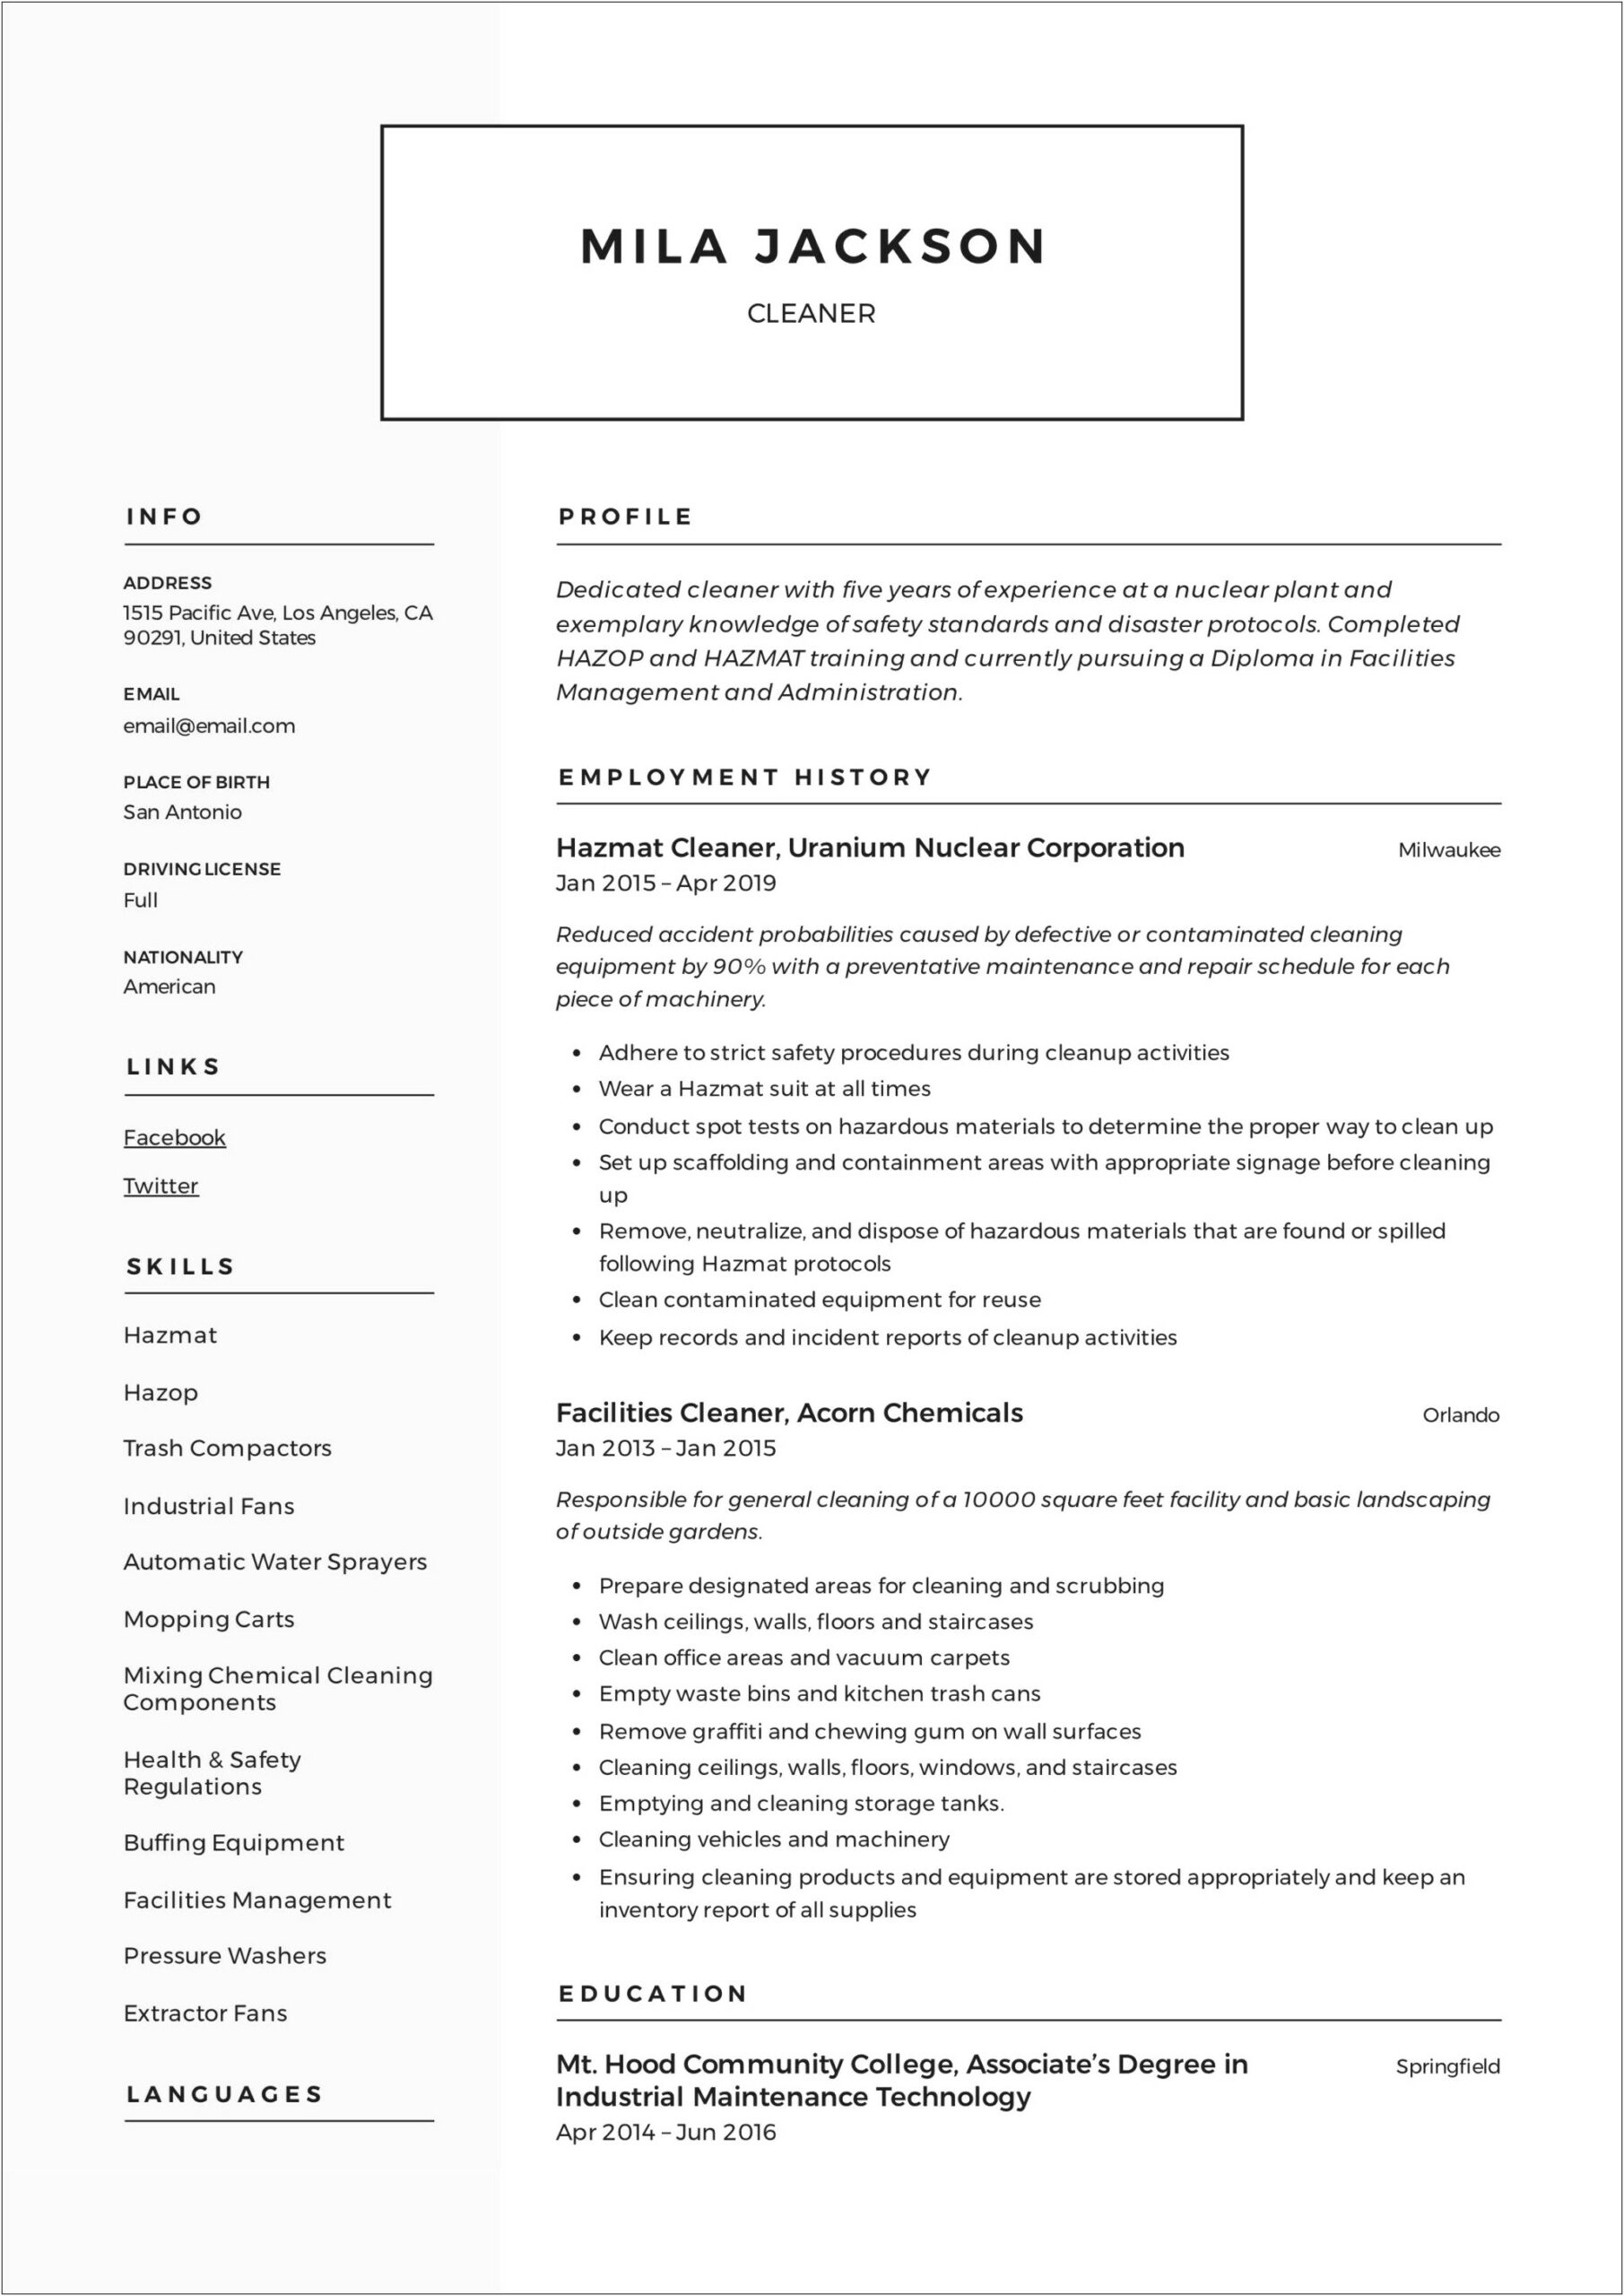 Cleaning Resume Skills And Work Experience